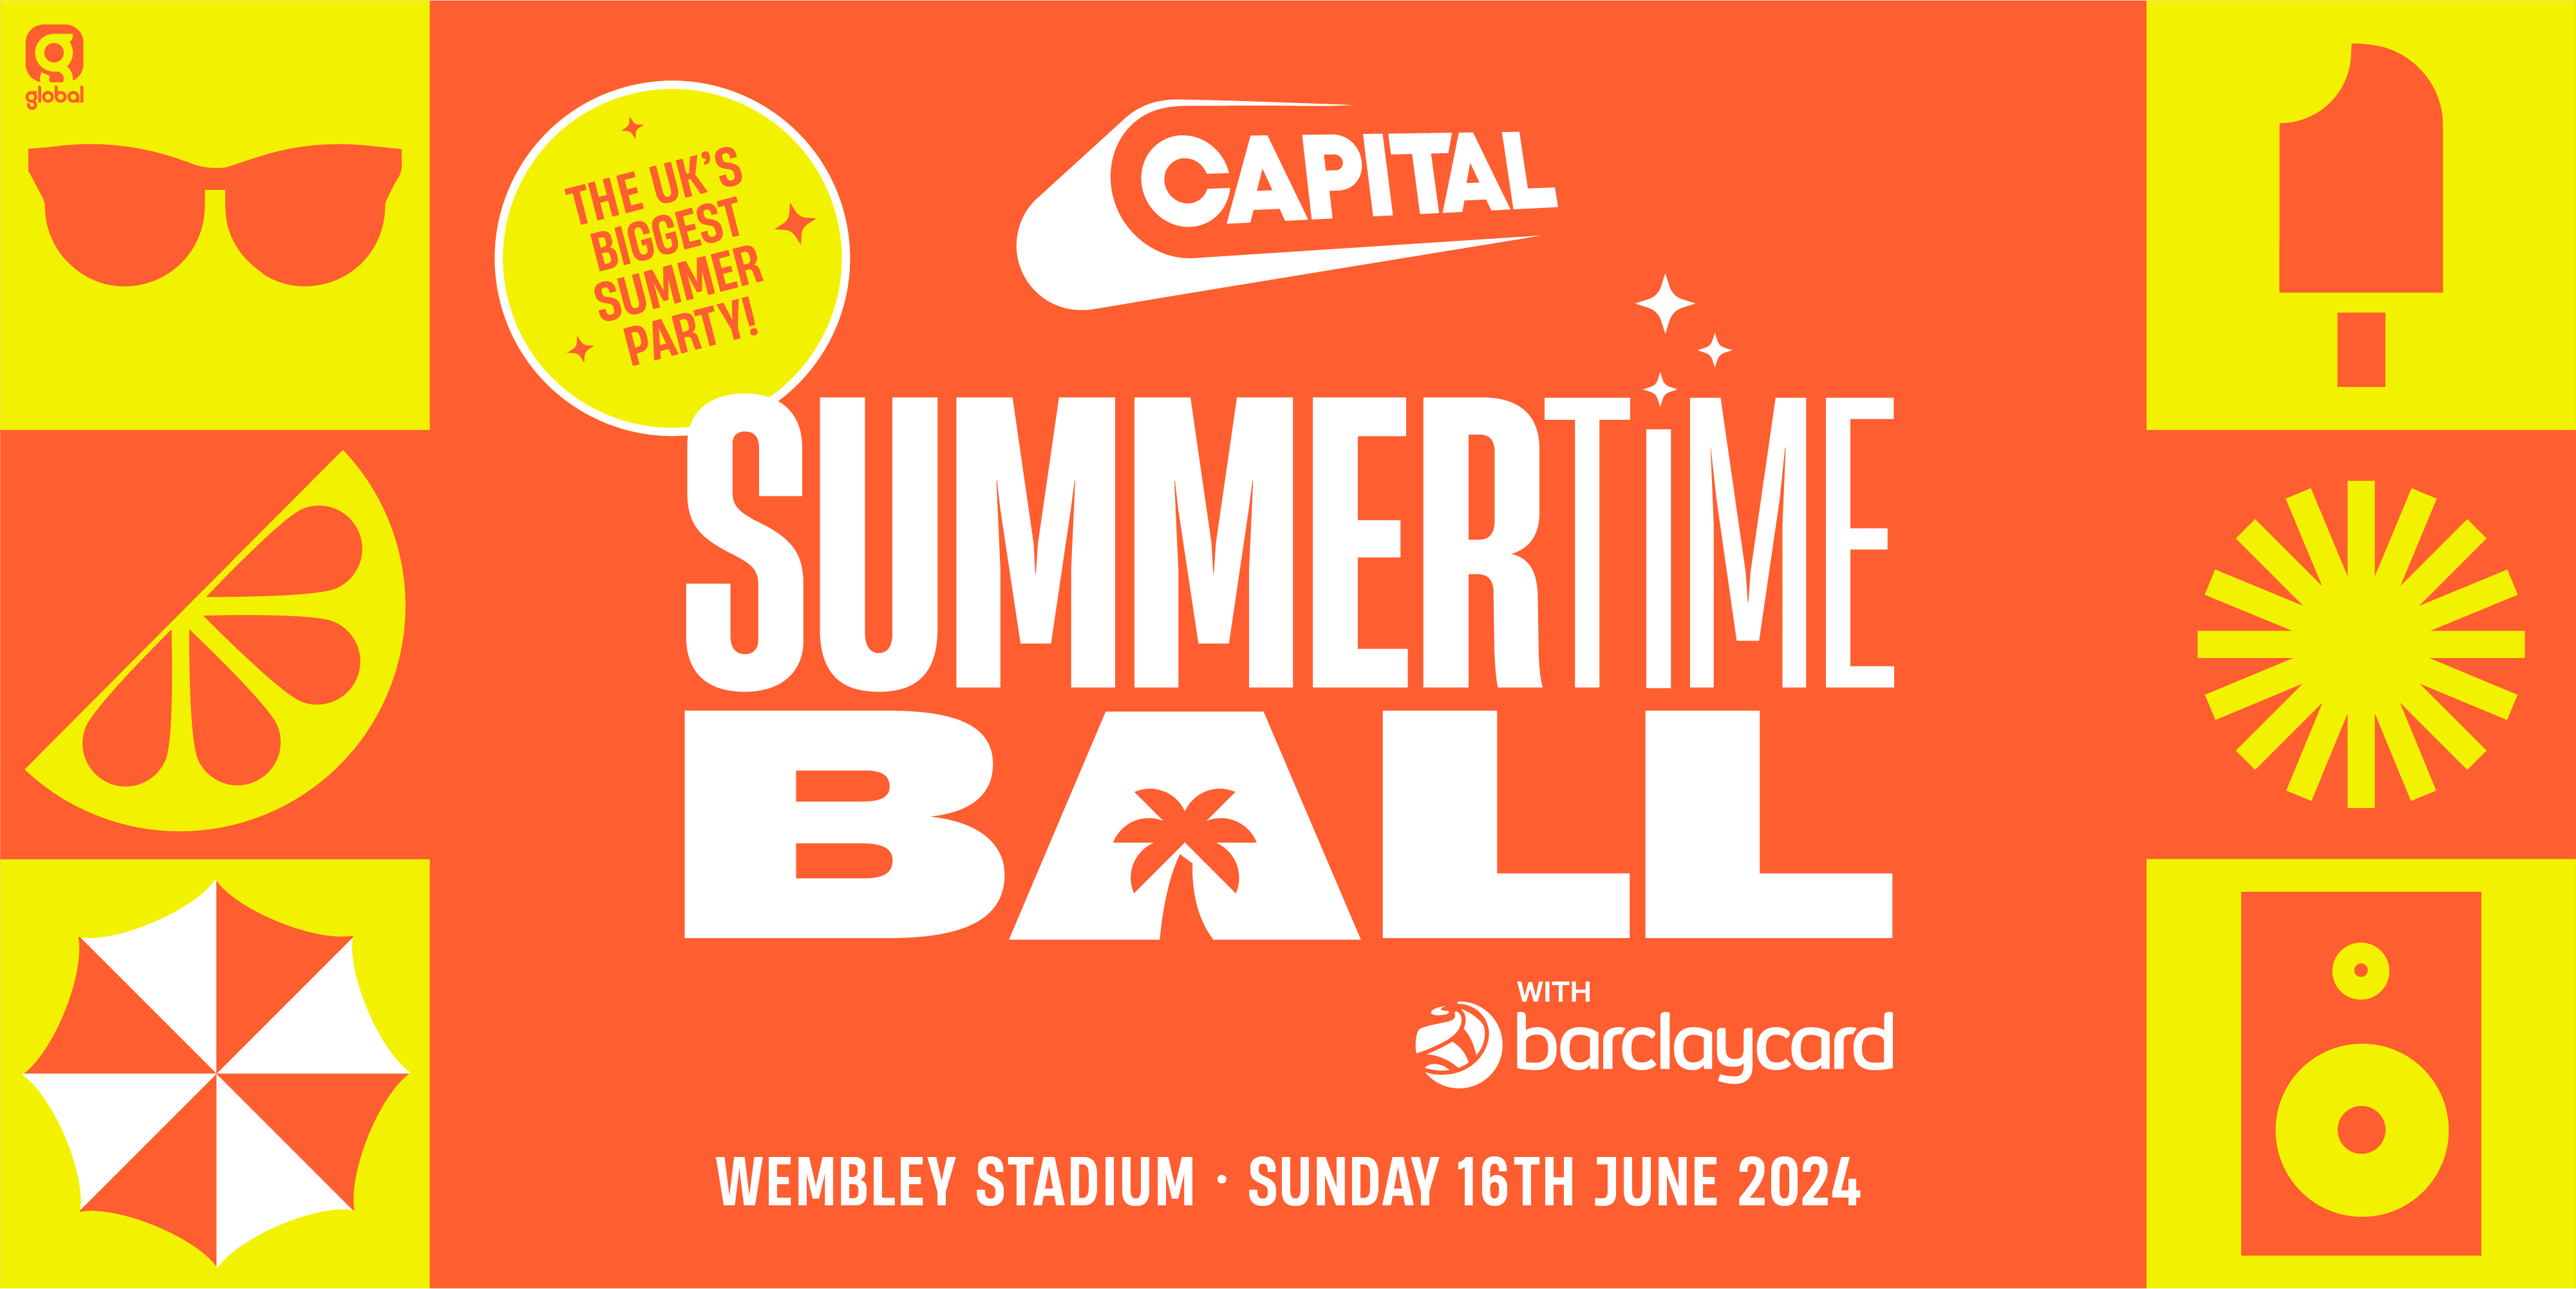 Capital’s Summertime Ball has officially sold out